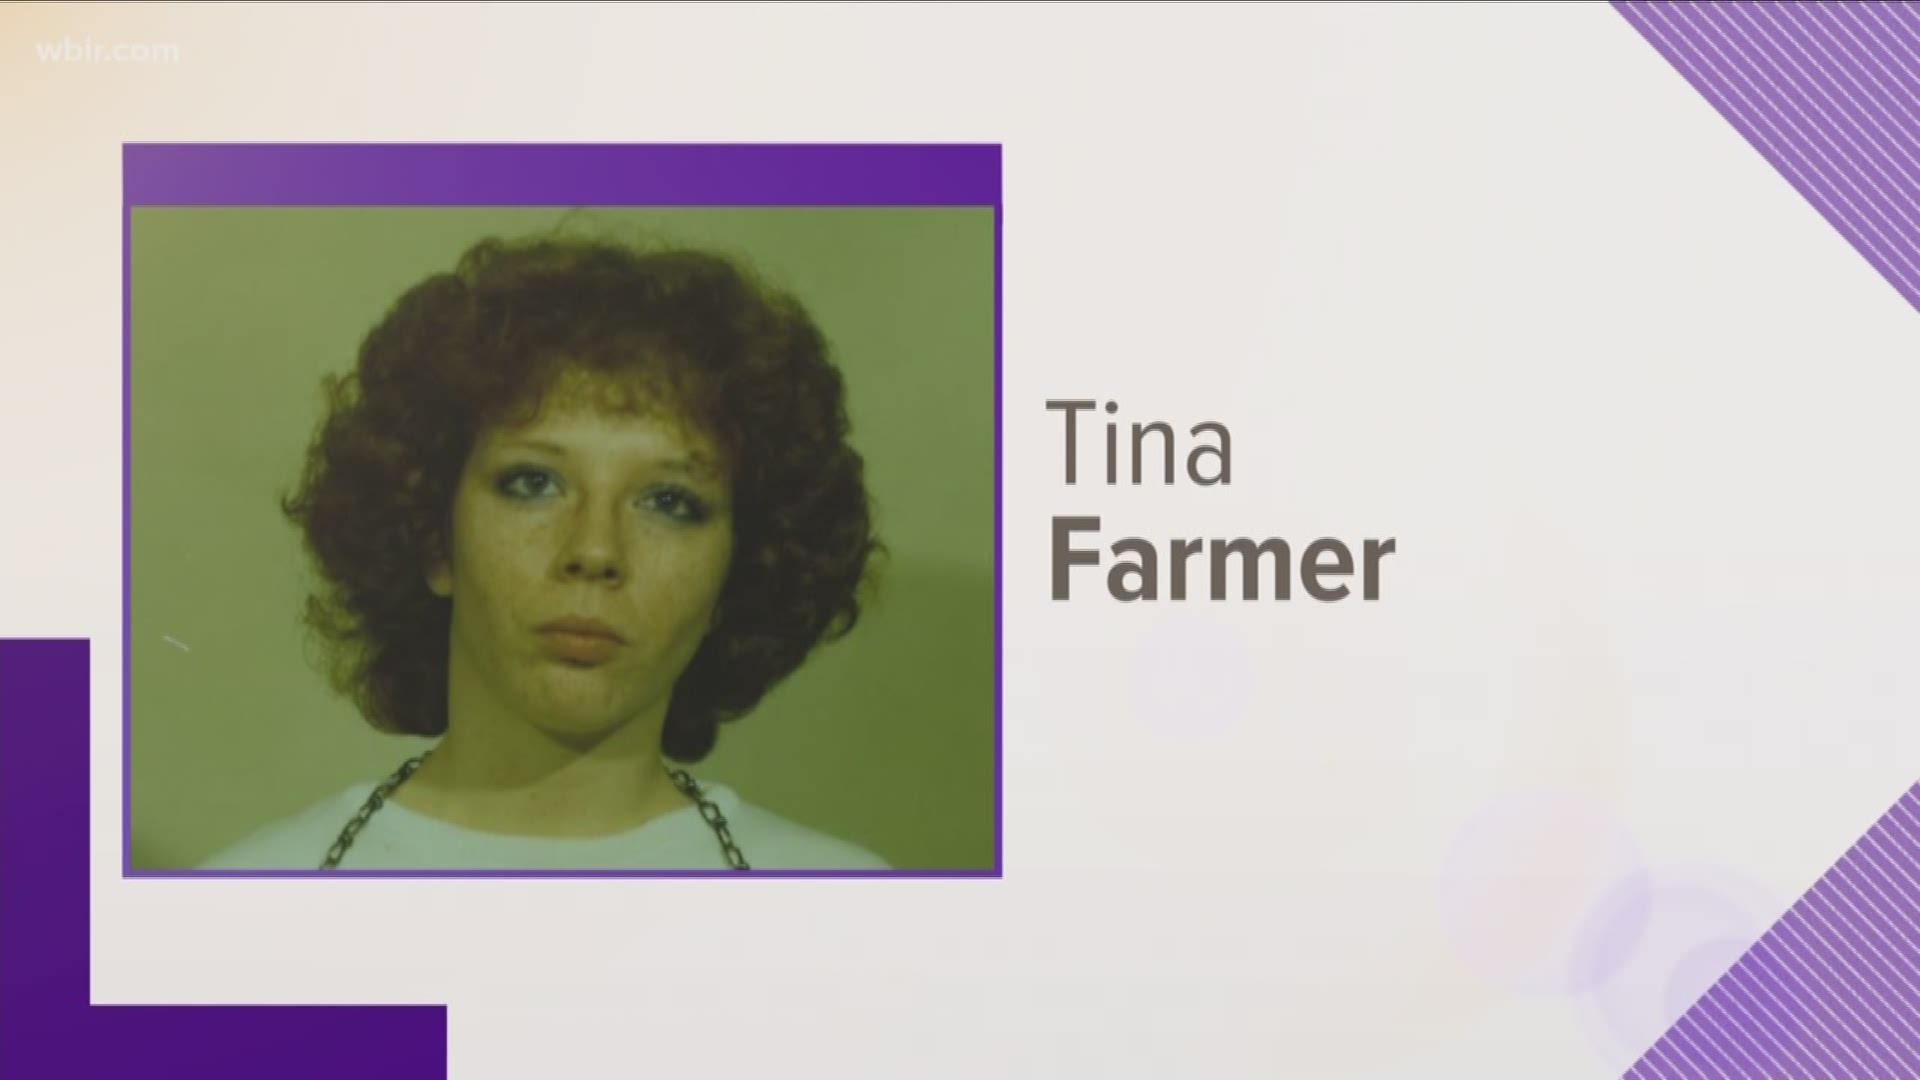 Tina Farmer was found dead along an East Tennessee interstate in 1985, but she remained missing and unidentified for more than three decades.  Her killer has not been caught.